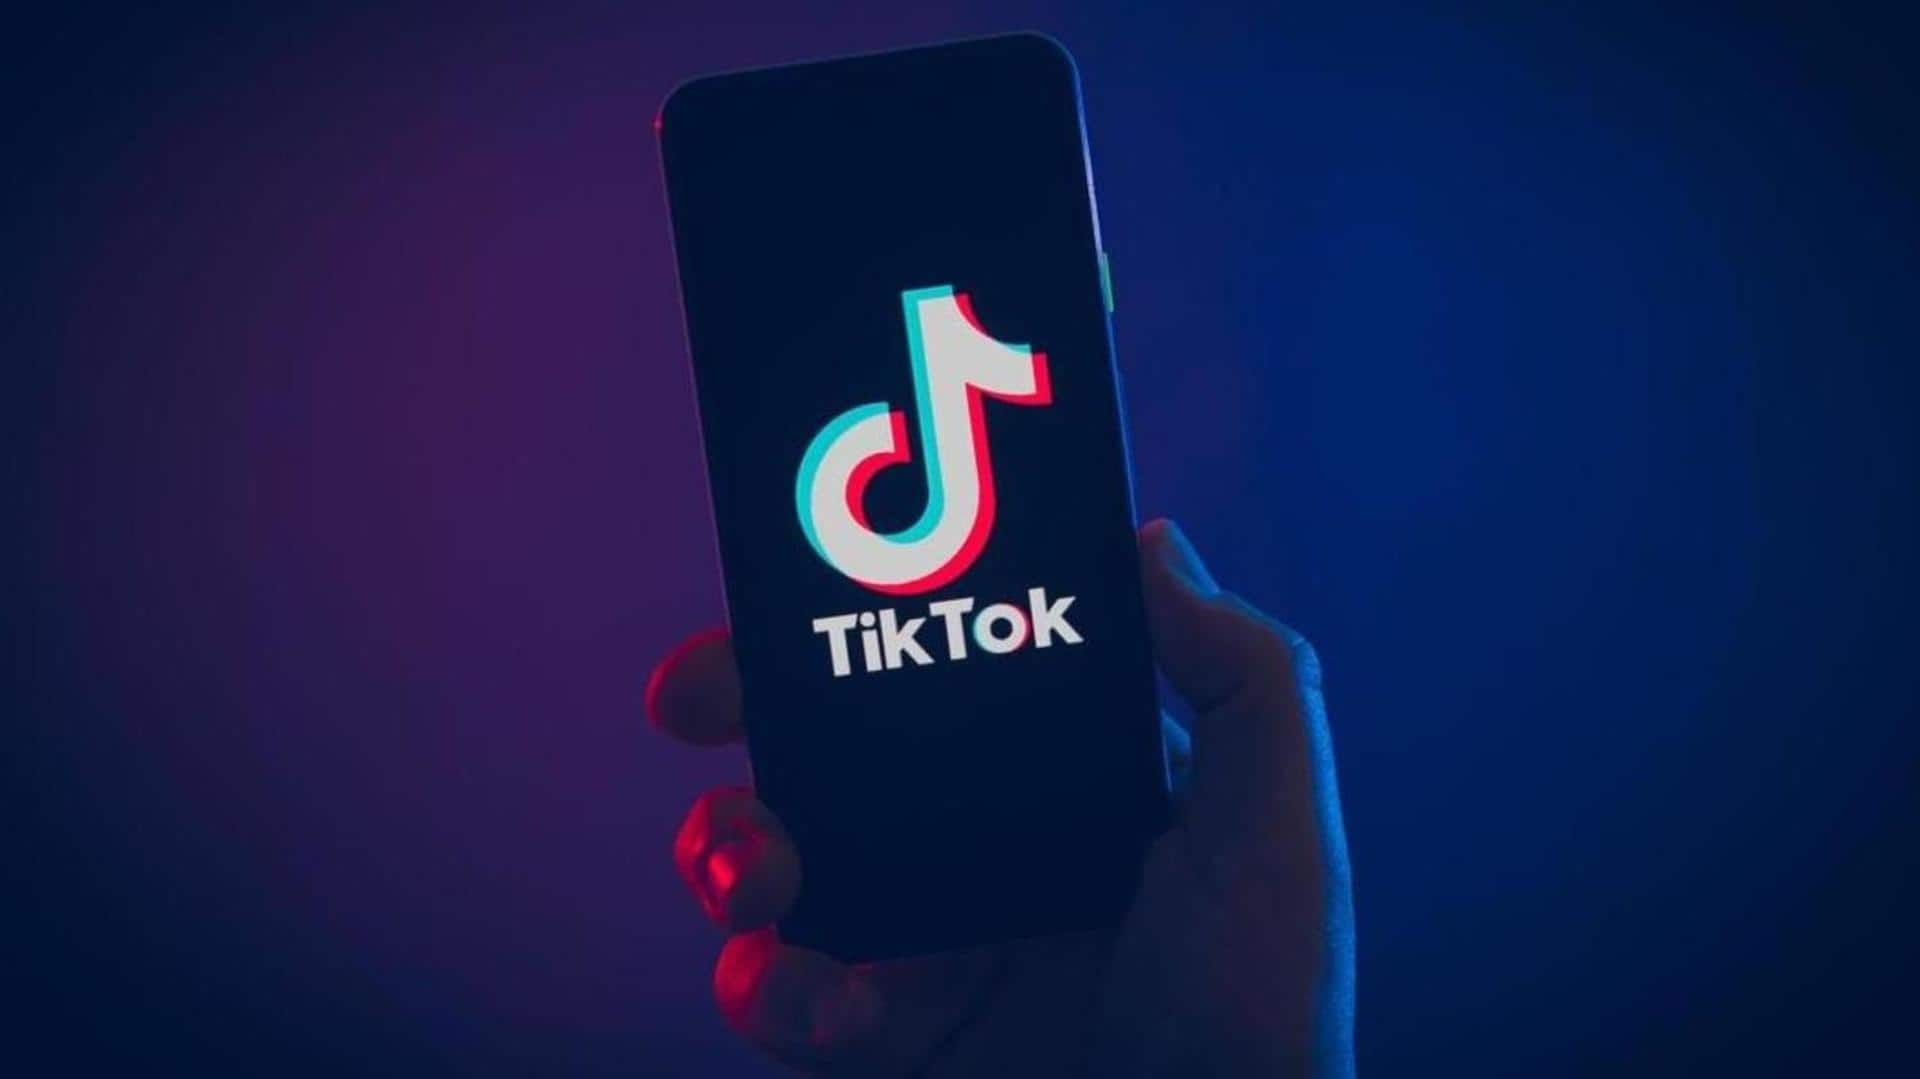 TikTok's existential crisis: What is the app's future